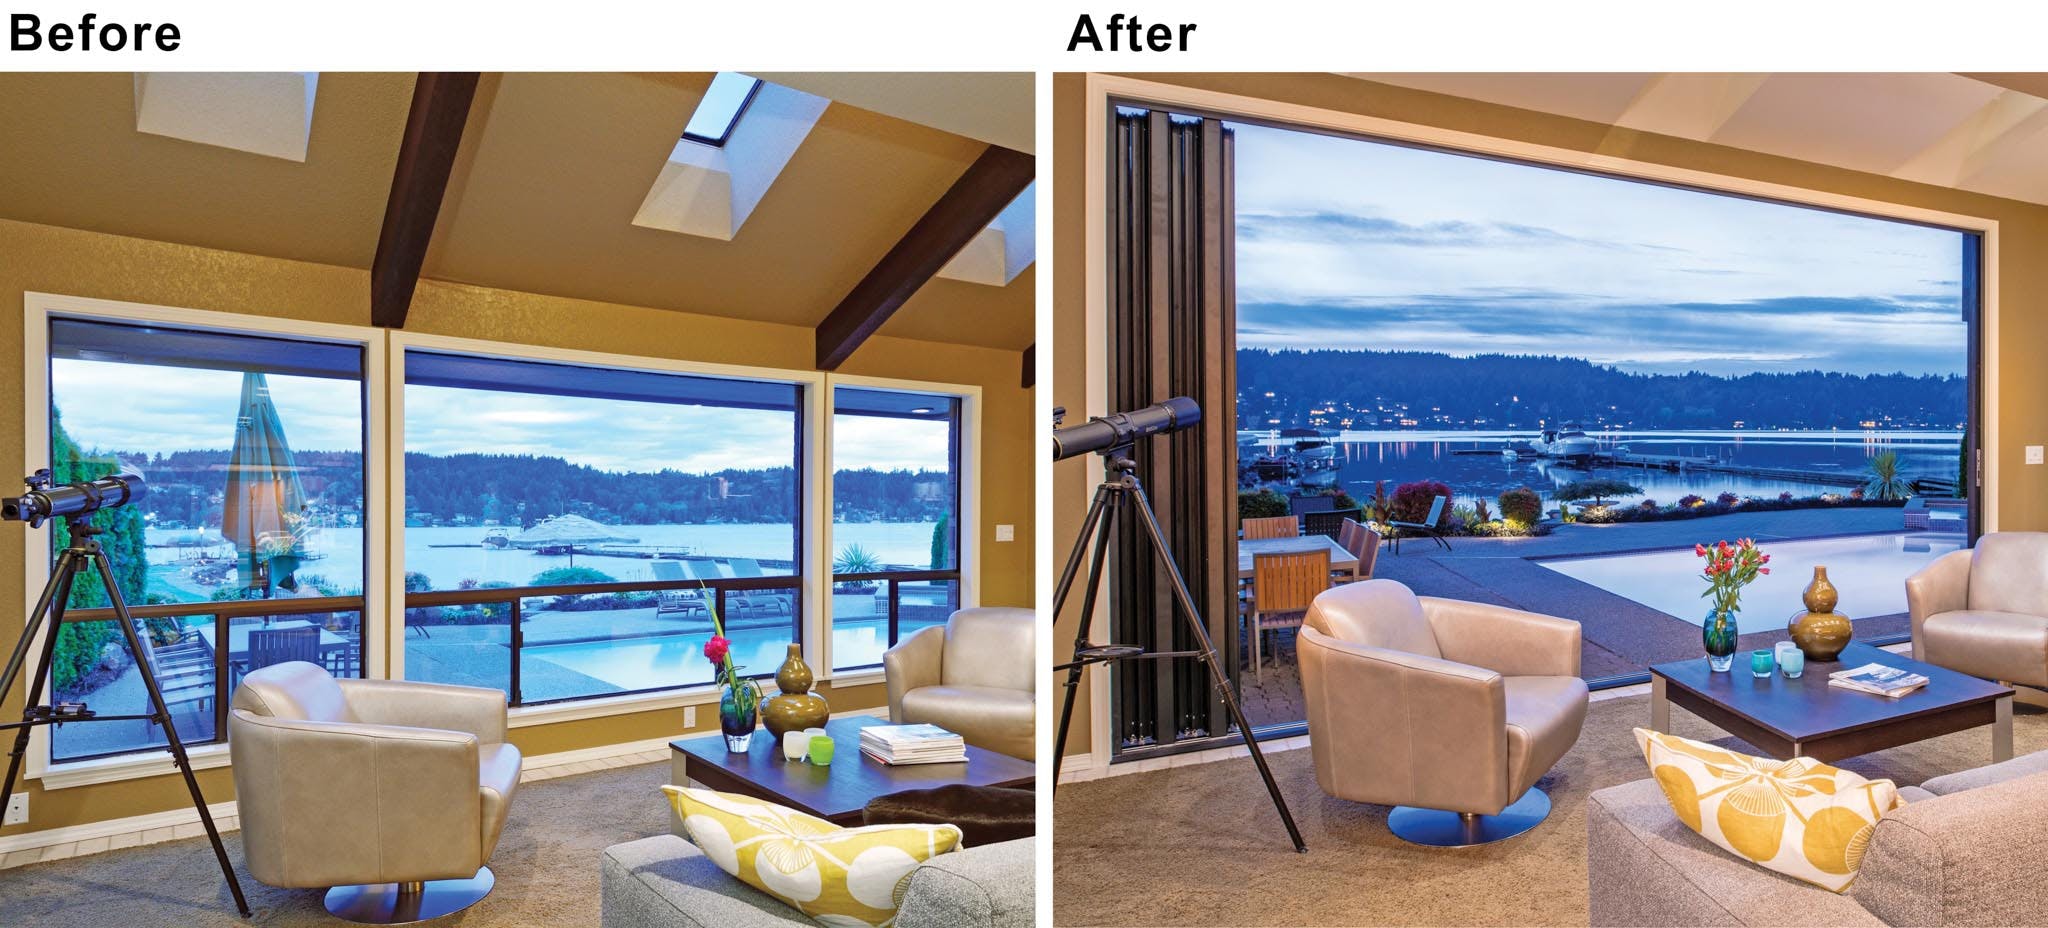 Living room remodel before and after with folding glass wall